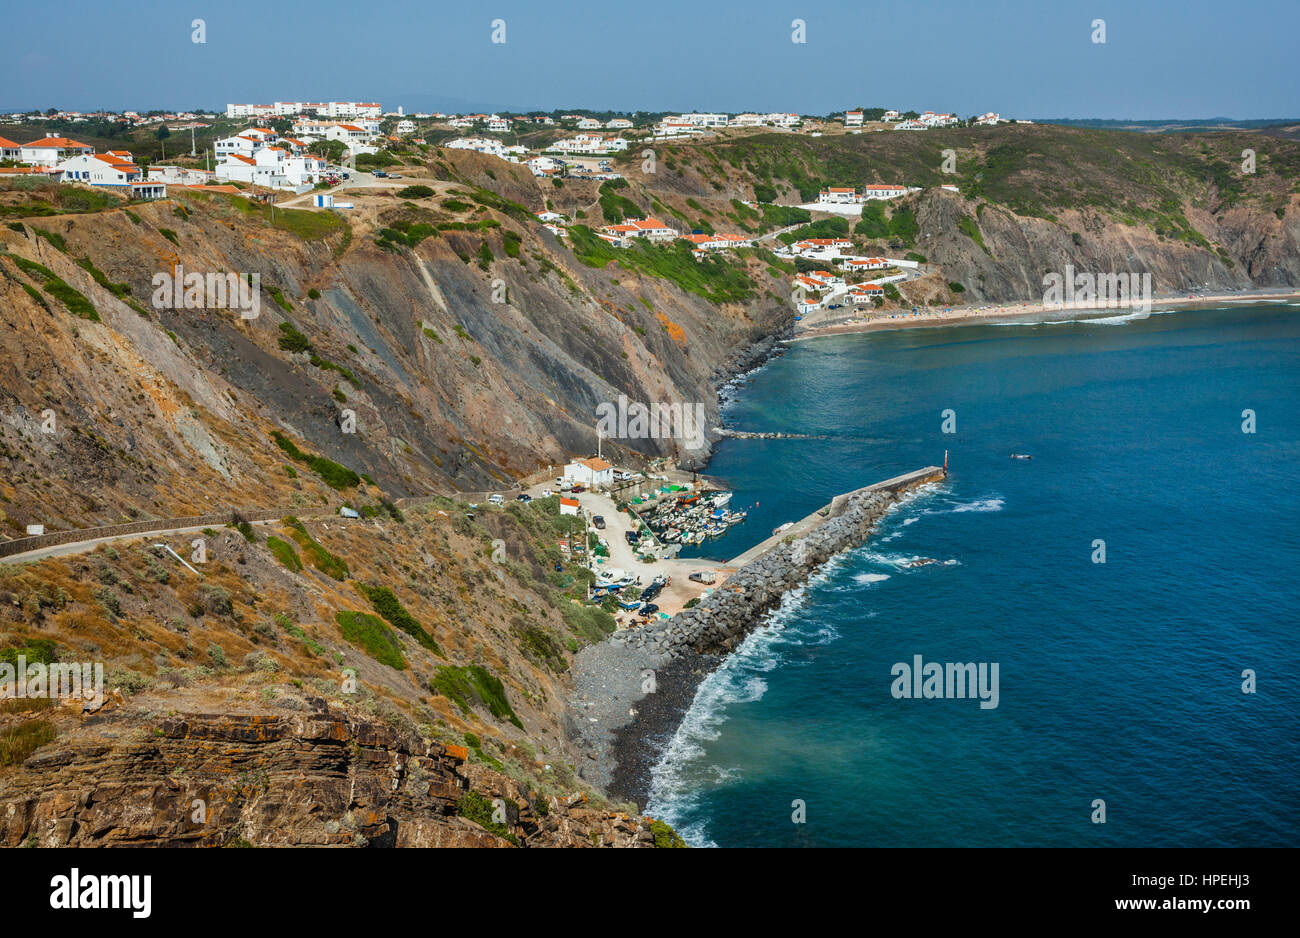 Portugal, Western Algarve, Vicentine Coast Natural Park, view of  harbour of the small fishing village of Arrifana and Praia da Arrifana beach Stock Photo